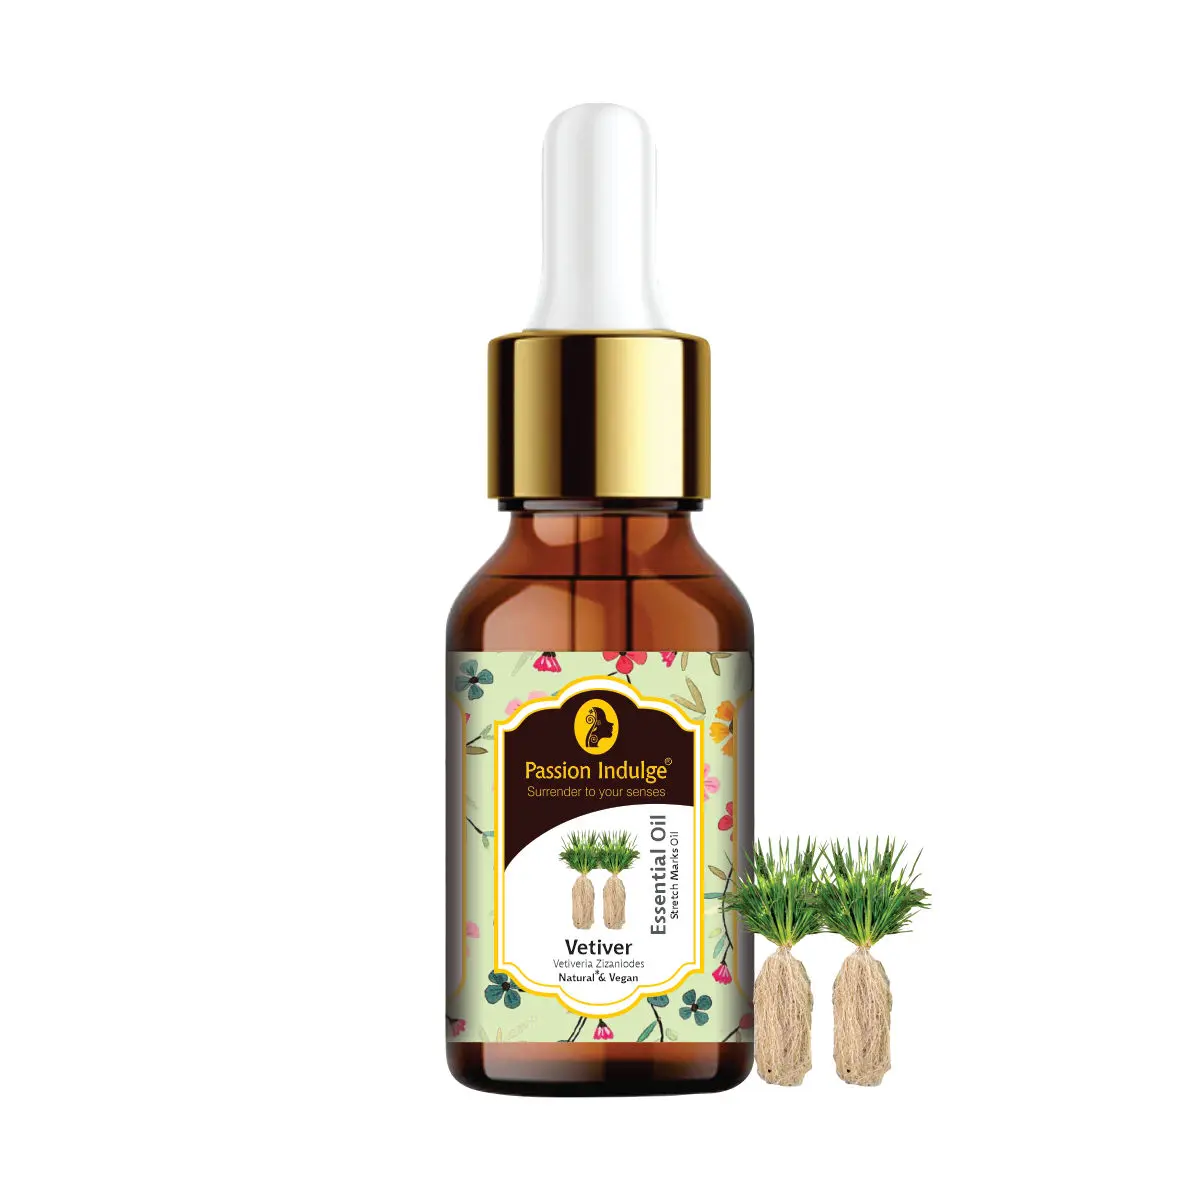 Passion Indulge Vetiver Essential oil for Anti-Scar, Anti-oxidant, skin tonic, prevents Premature ageing-10 ml